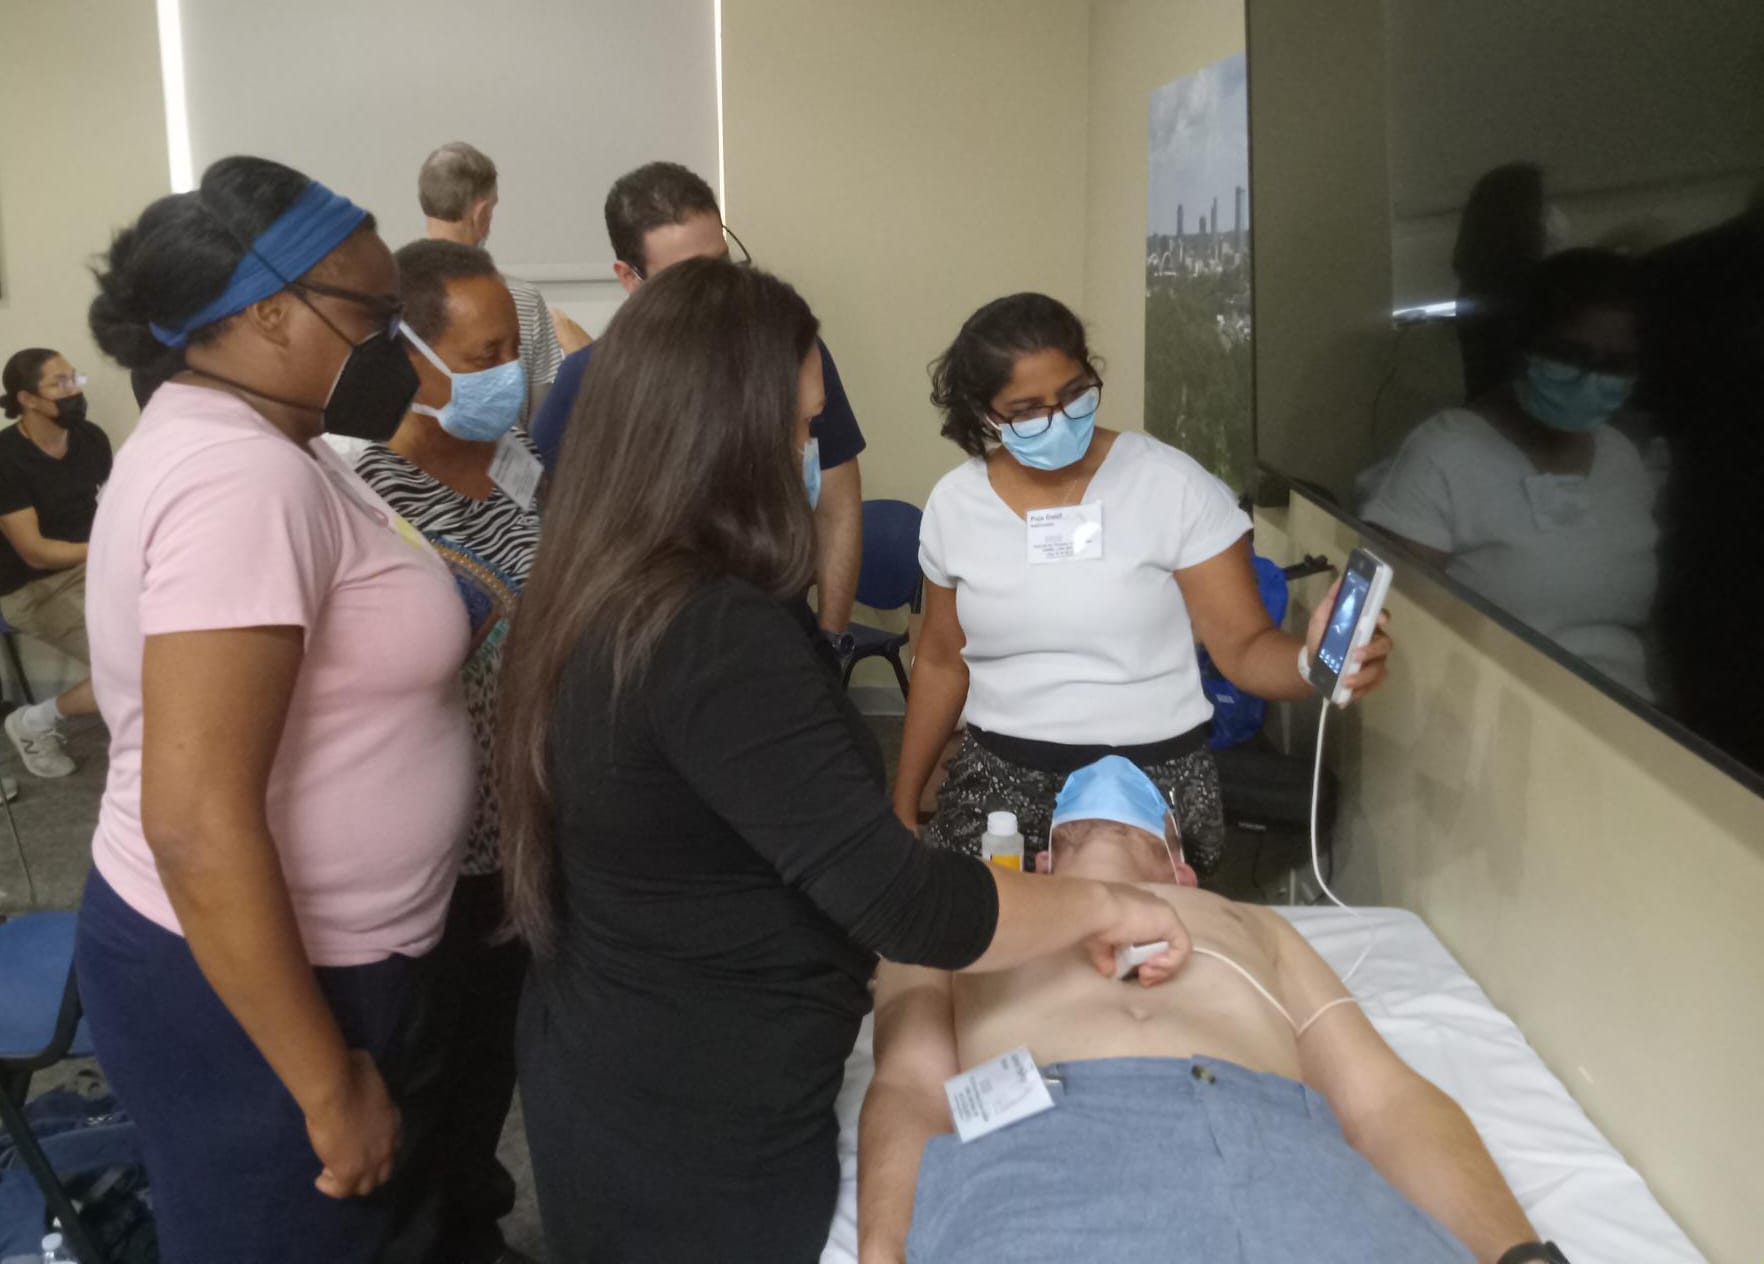 Physicians conduct a training session on point-of-care ultrasound technology. The training program is funded through the Health Resources and Services Administration’s Medical Student Education program.